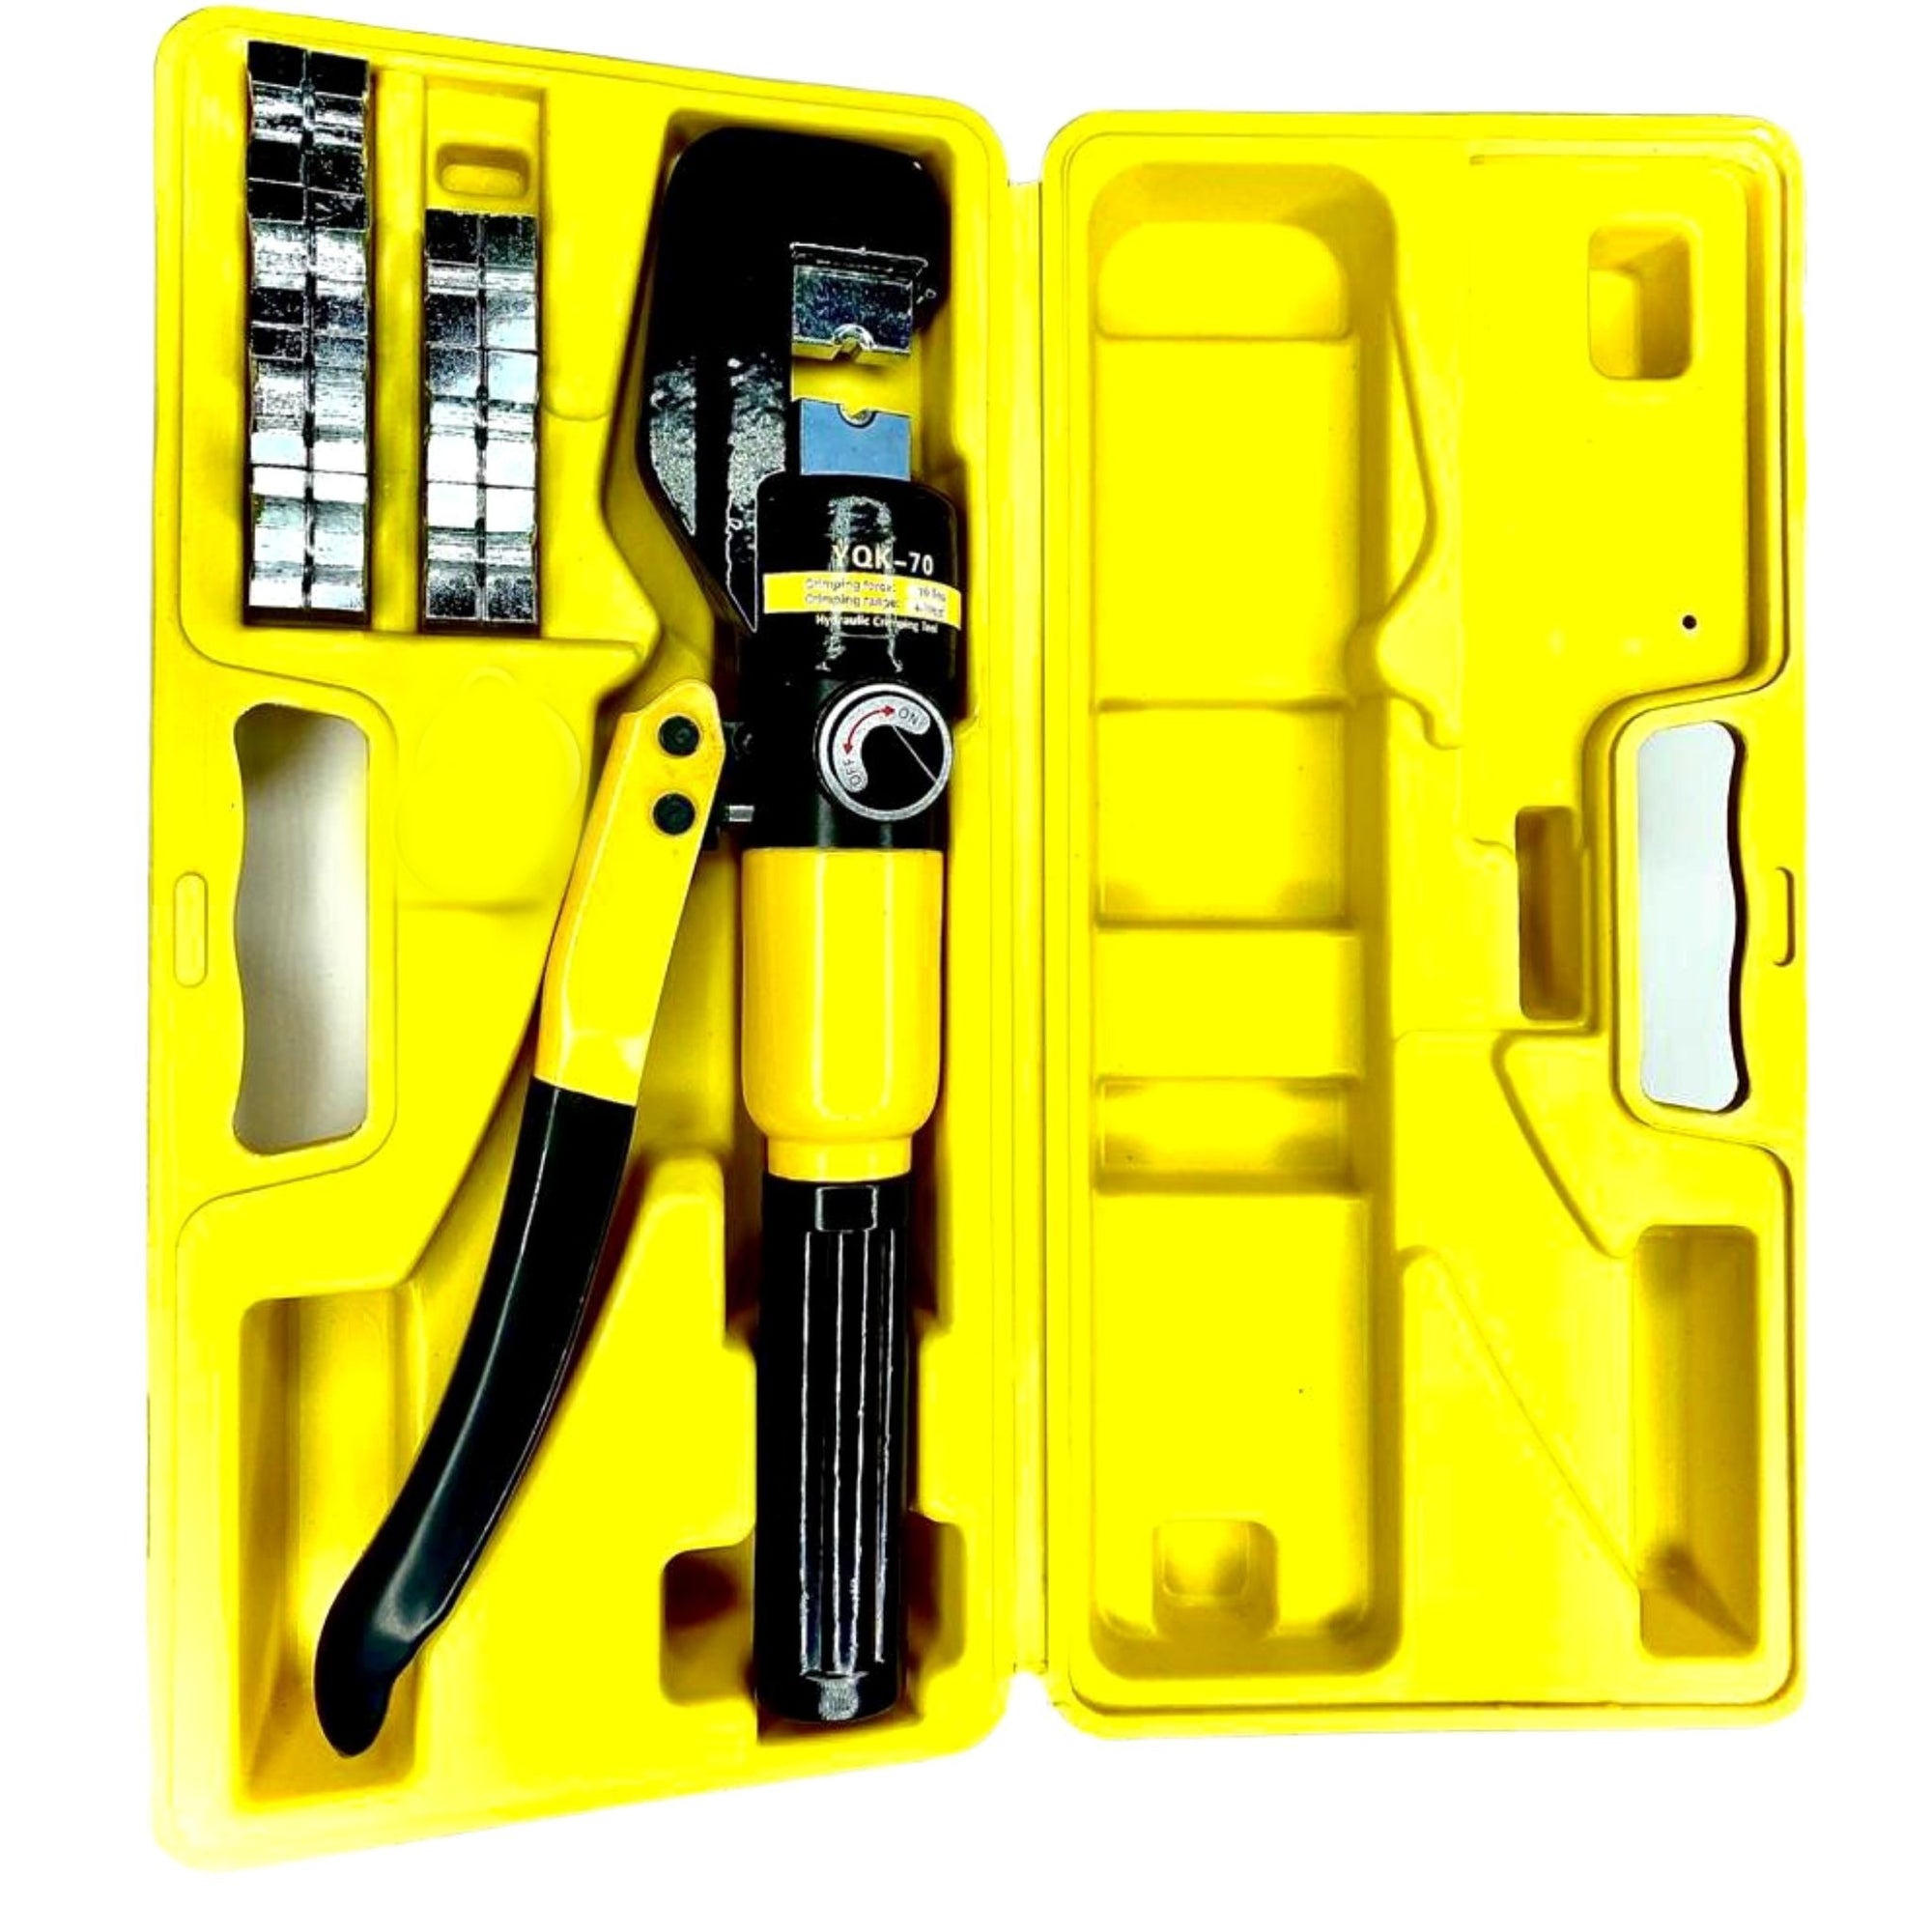 Hydraulic Crimping Tool 8 ton- 4mm² to 70mm² - South East Clearance Centre